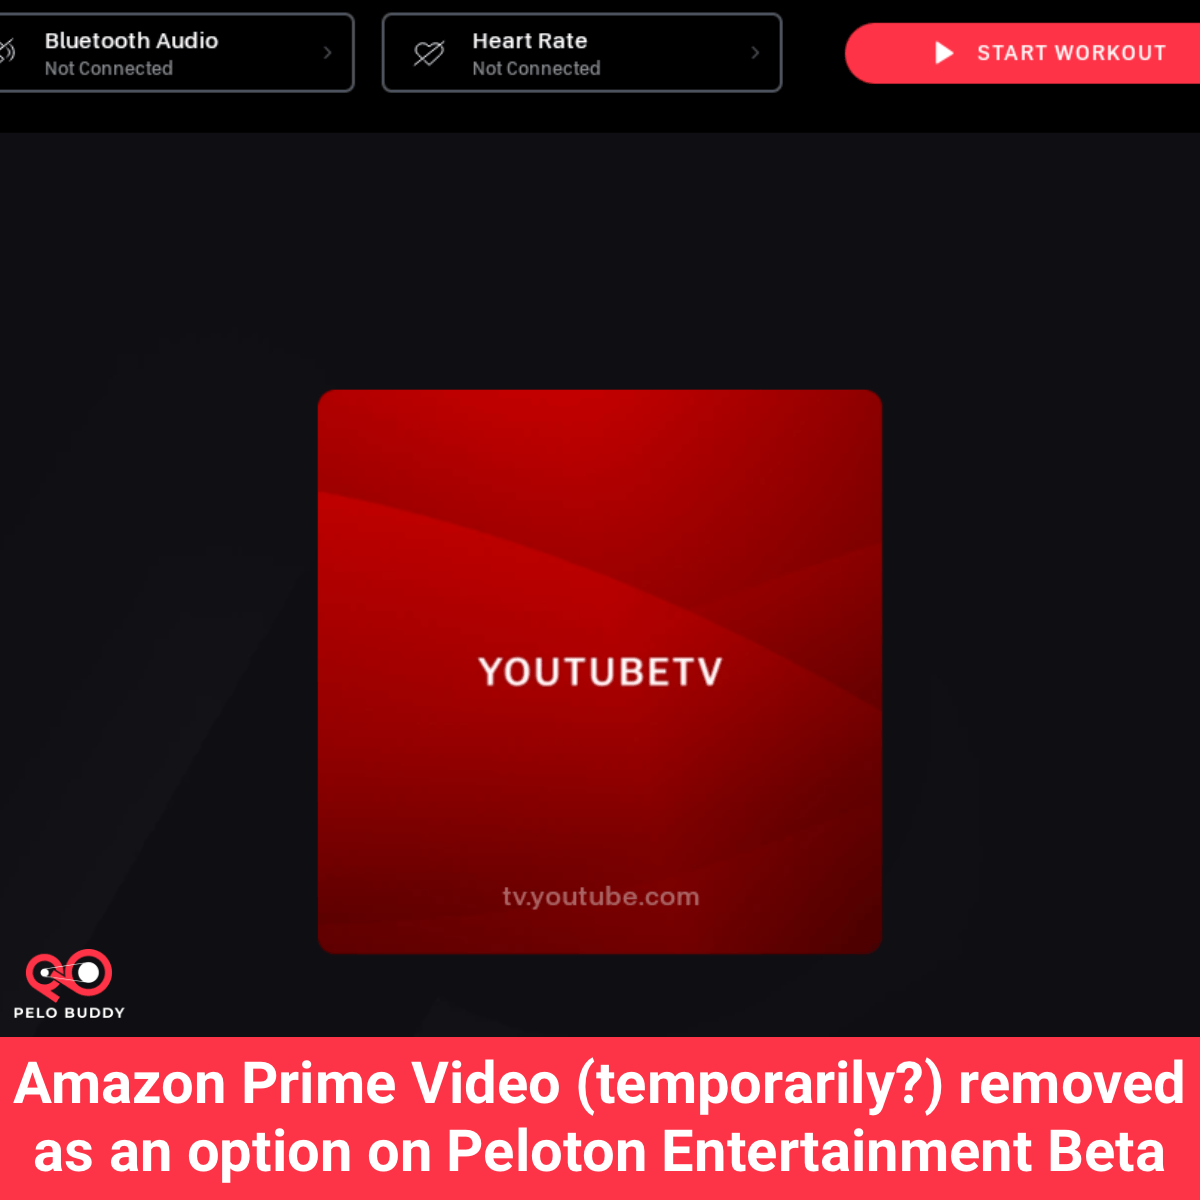 Amazon Prime Video Removed From Peloton Entertainment Beta (Temporarily?) - YouTube TV Remains